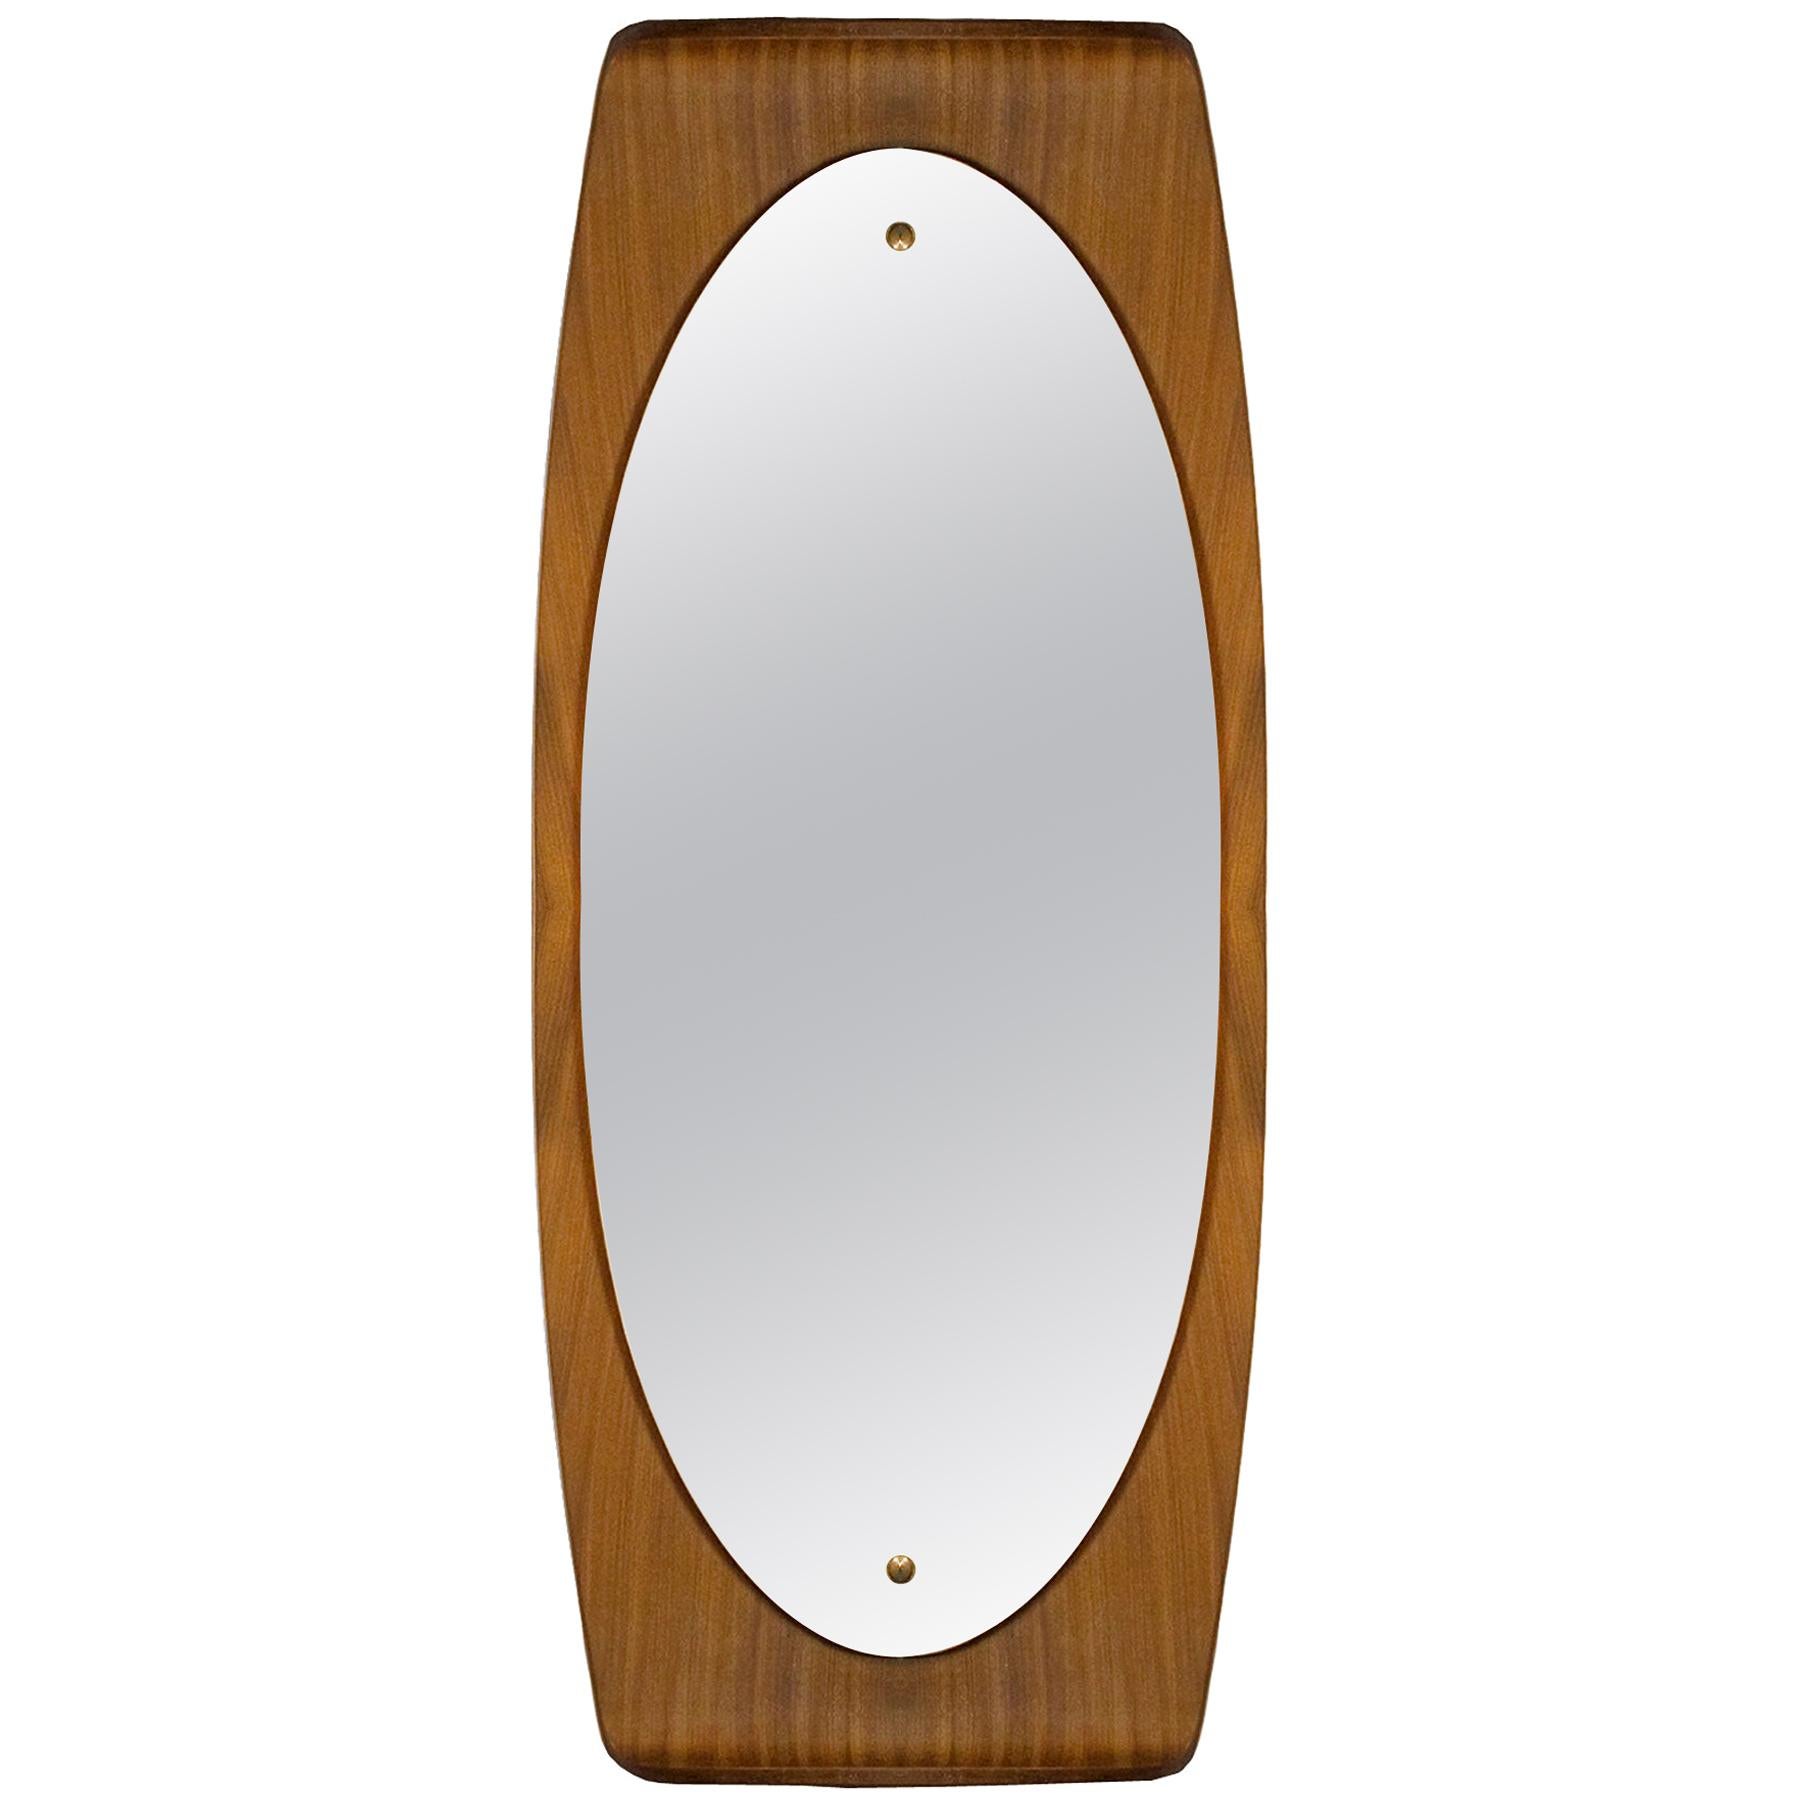 Large Mid-Century Modern Curved Mirror by Campo & Graffi, Teak, Brass - Italy For Sale